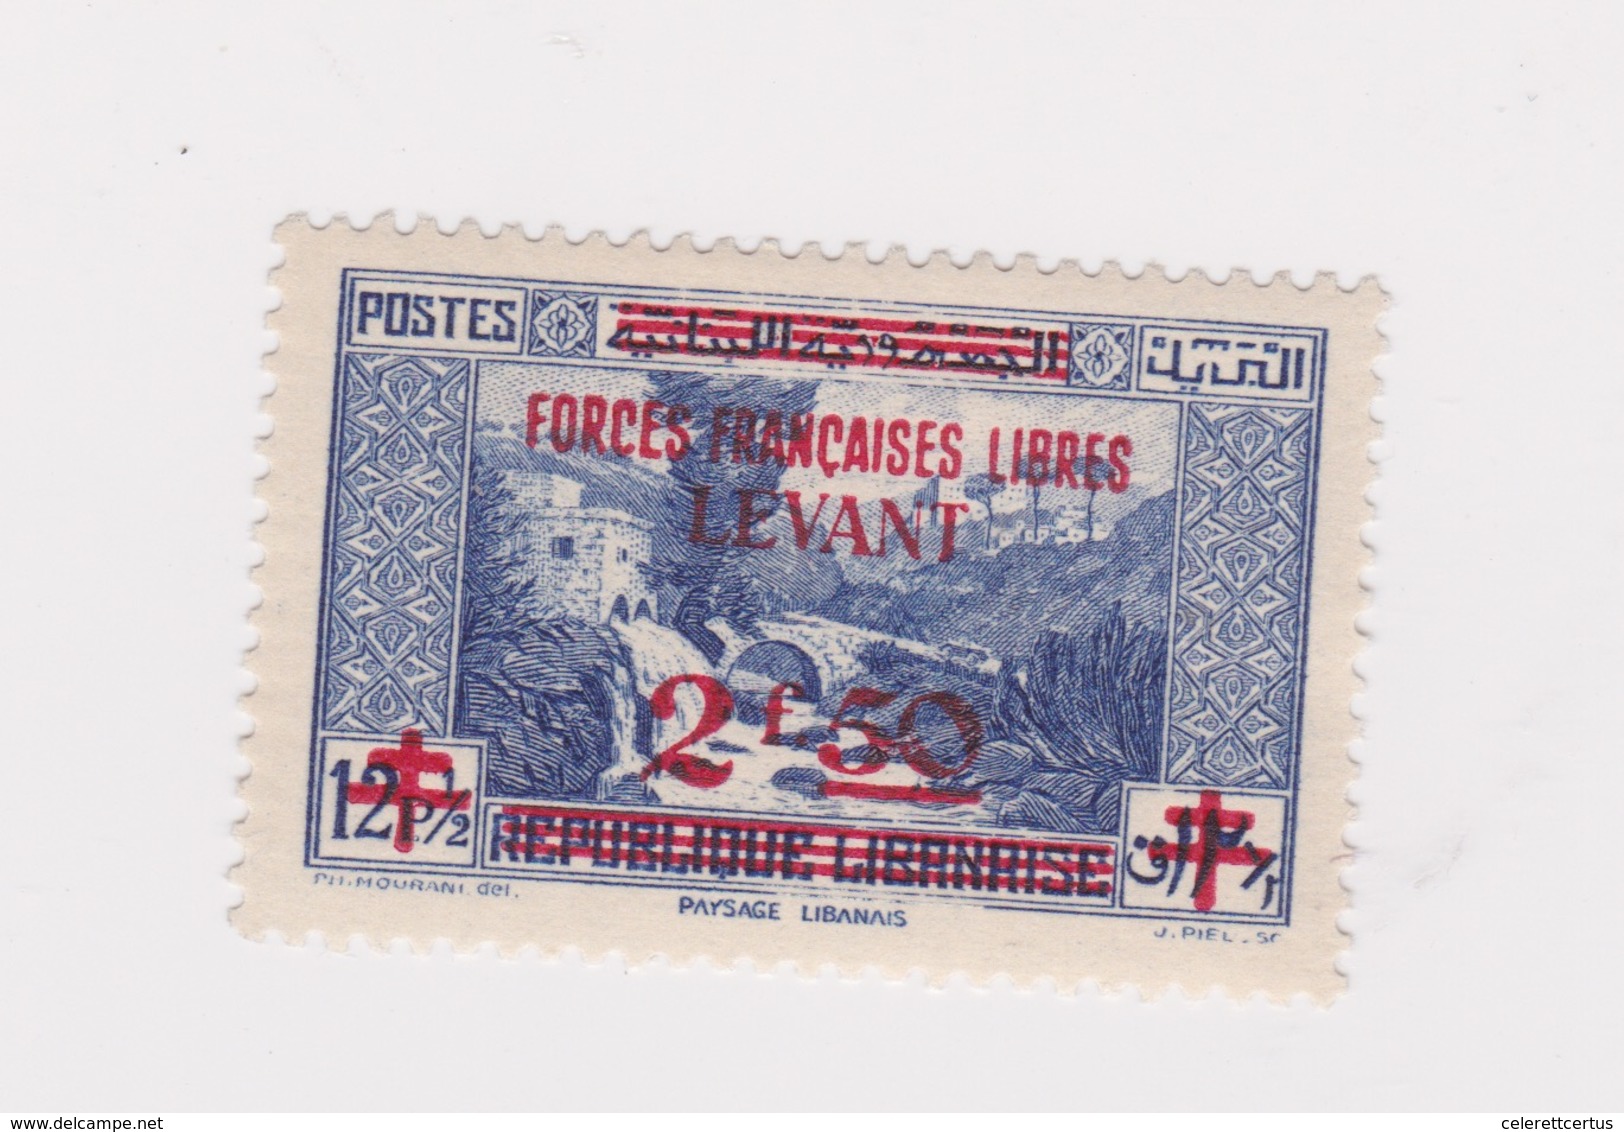 Syria-1942 World War 2 Free French Forces In The Levant 2.50 Red Overprint On 12 1/2 Piasters Blue SG 3 - Siria